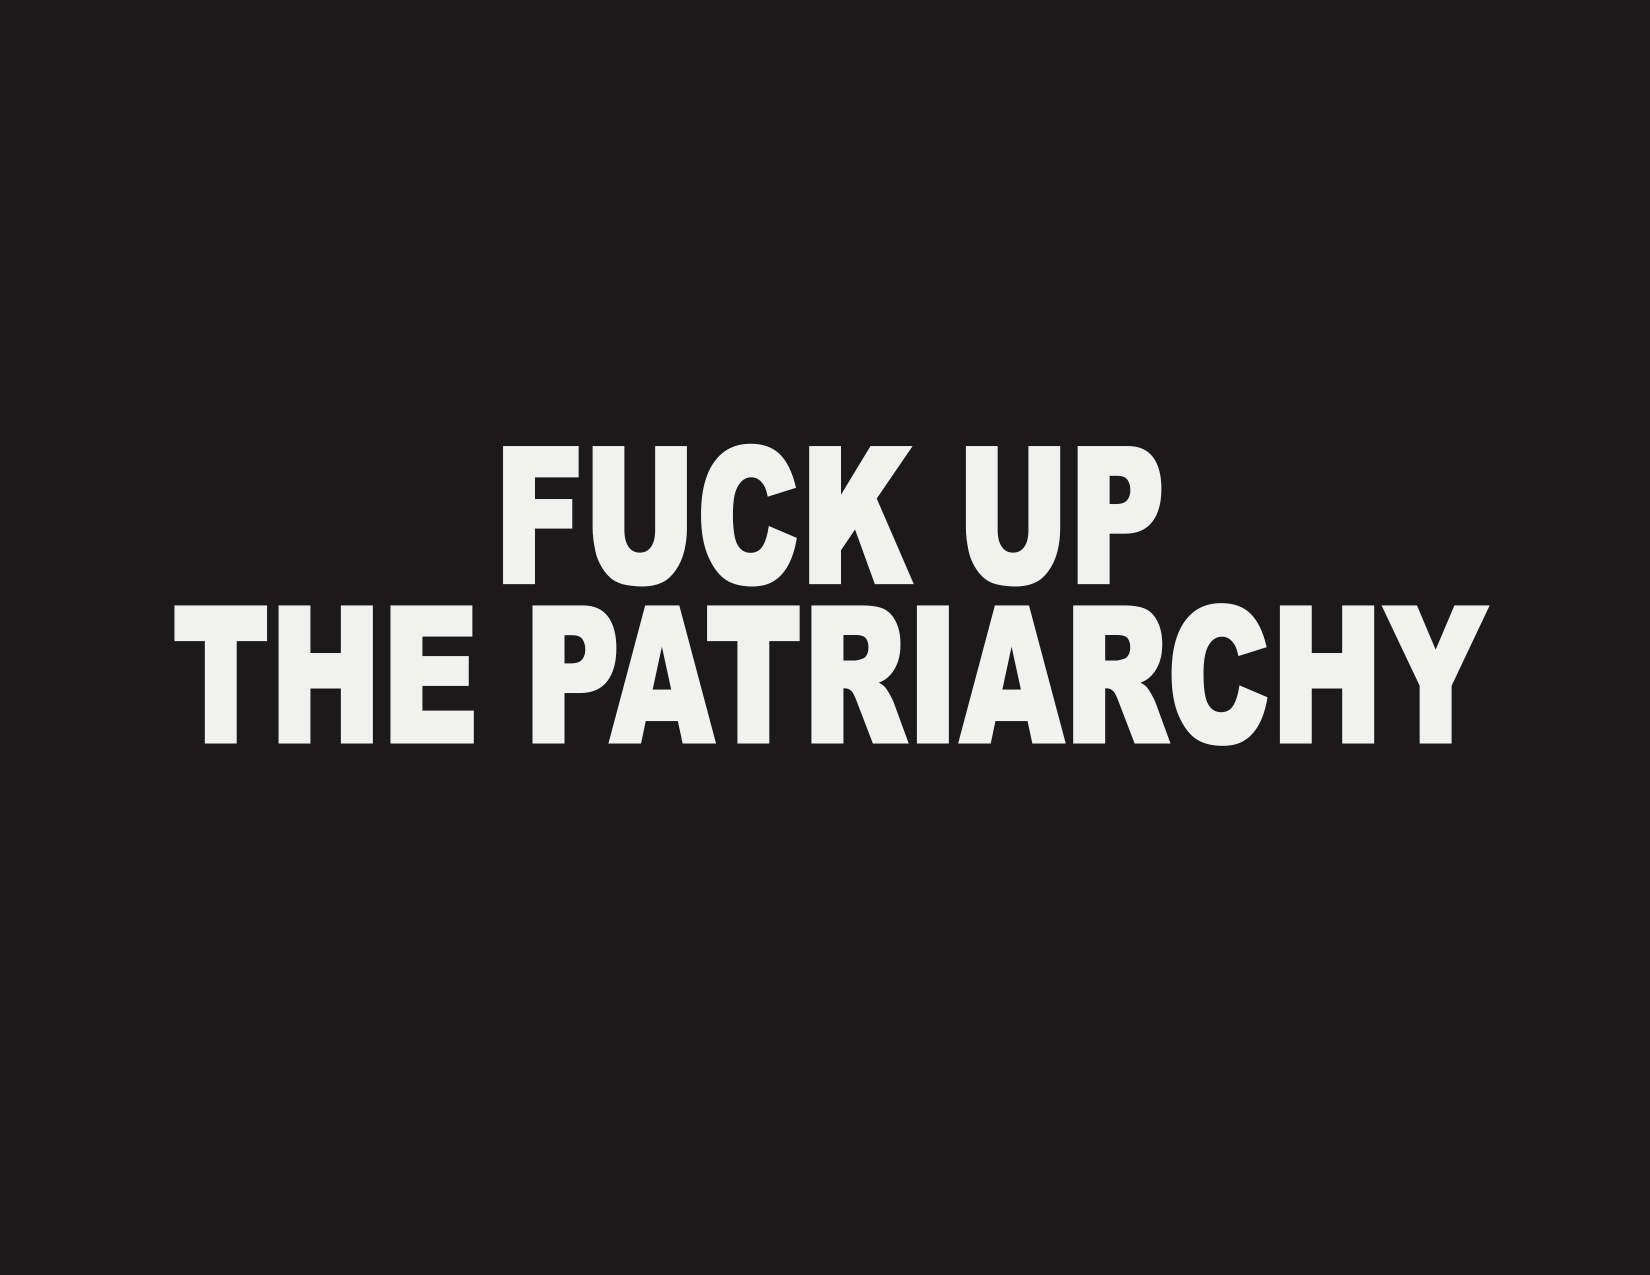 FUCK UP THE PATRIARCHY